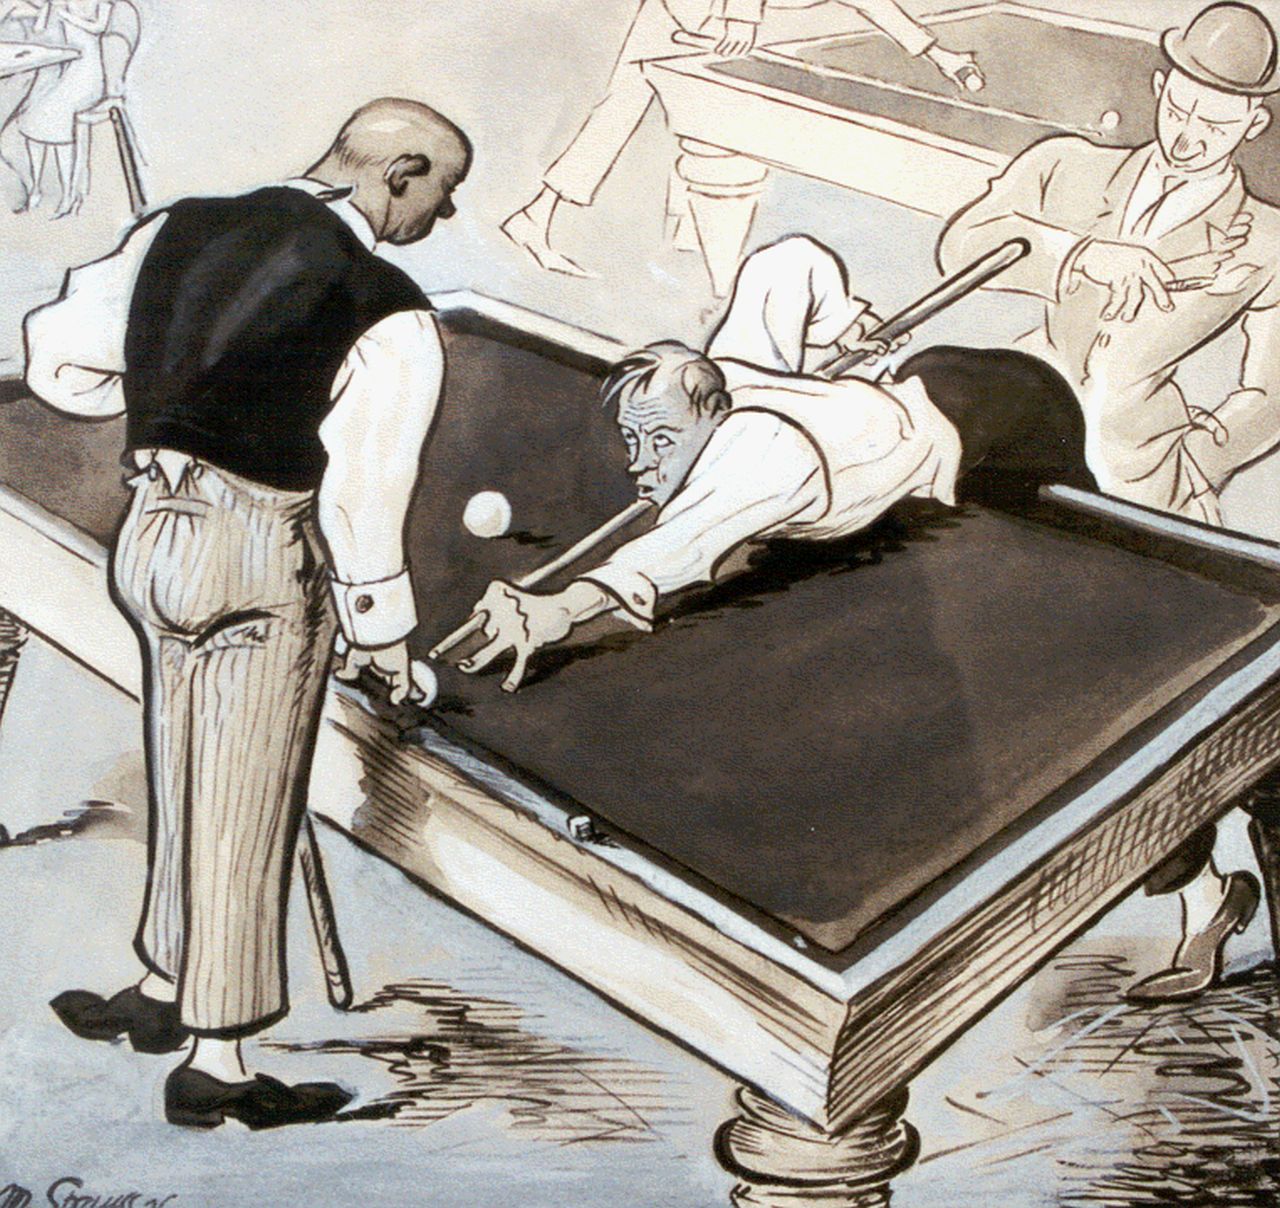 Strauss M.  | Strauss, Billiards, gouache on paper 25.7 x 27.7 cm, signed l.l. and dated '26 on the reverse